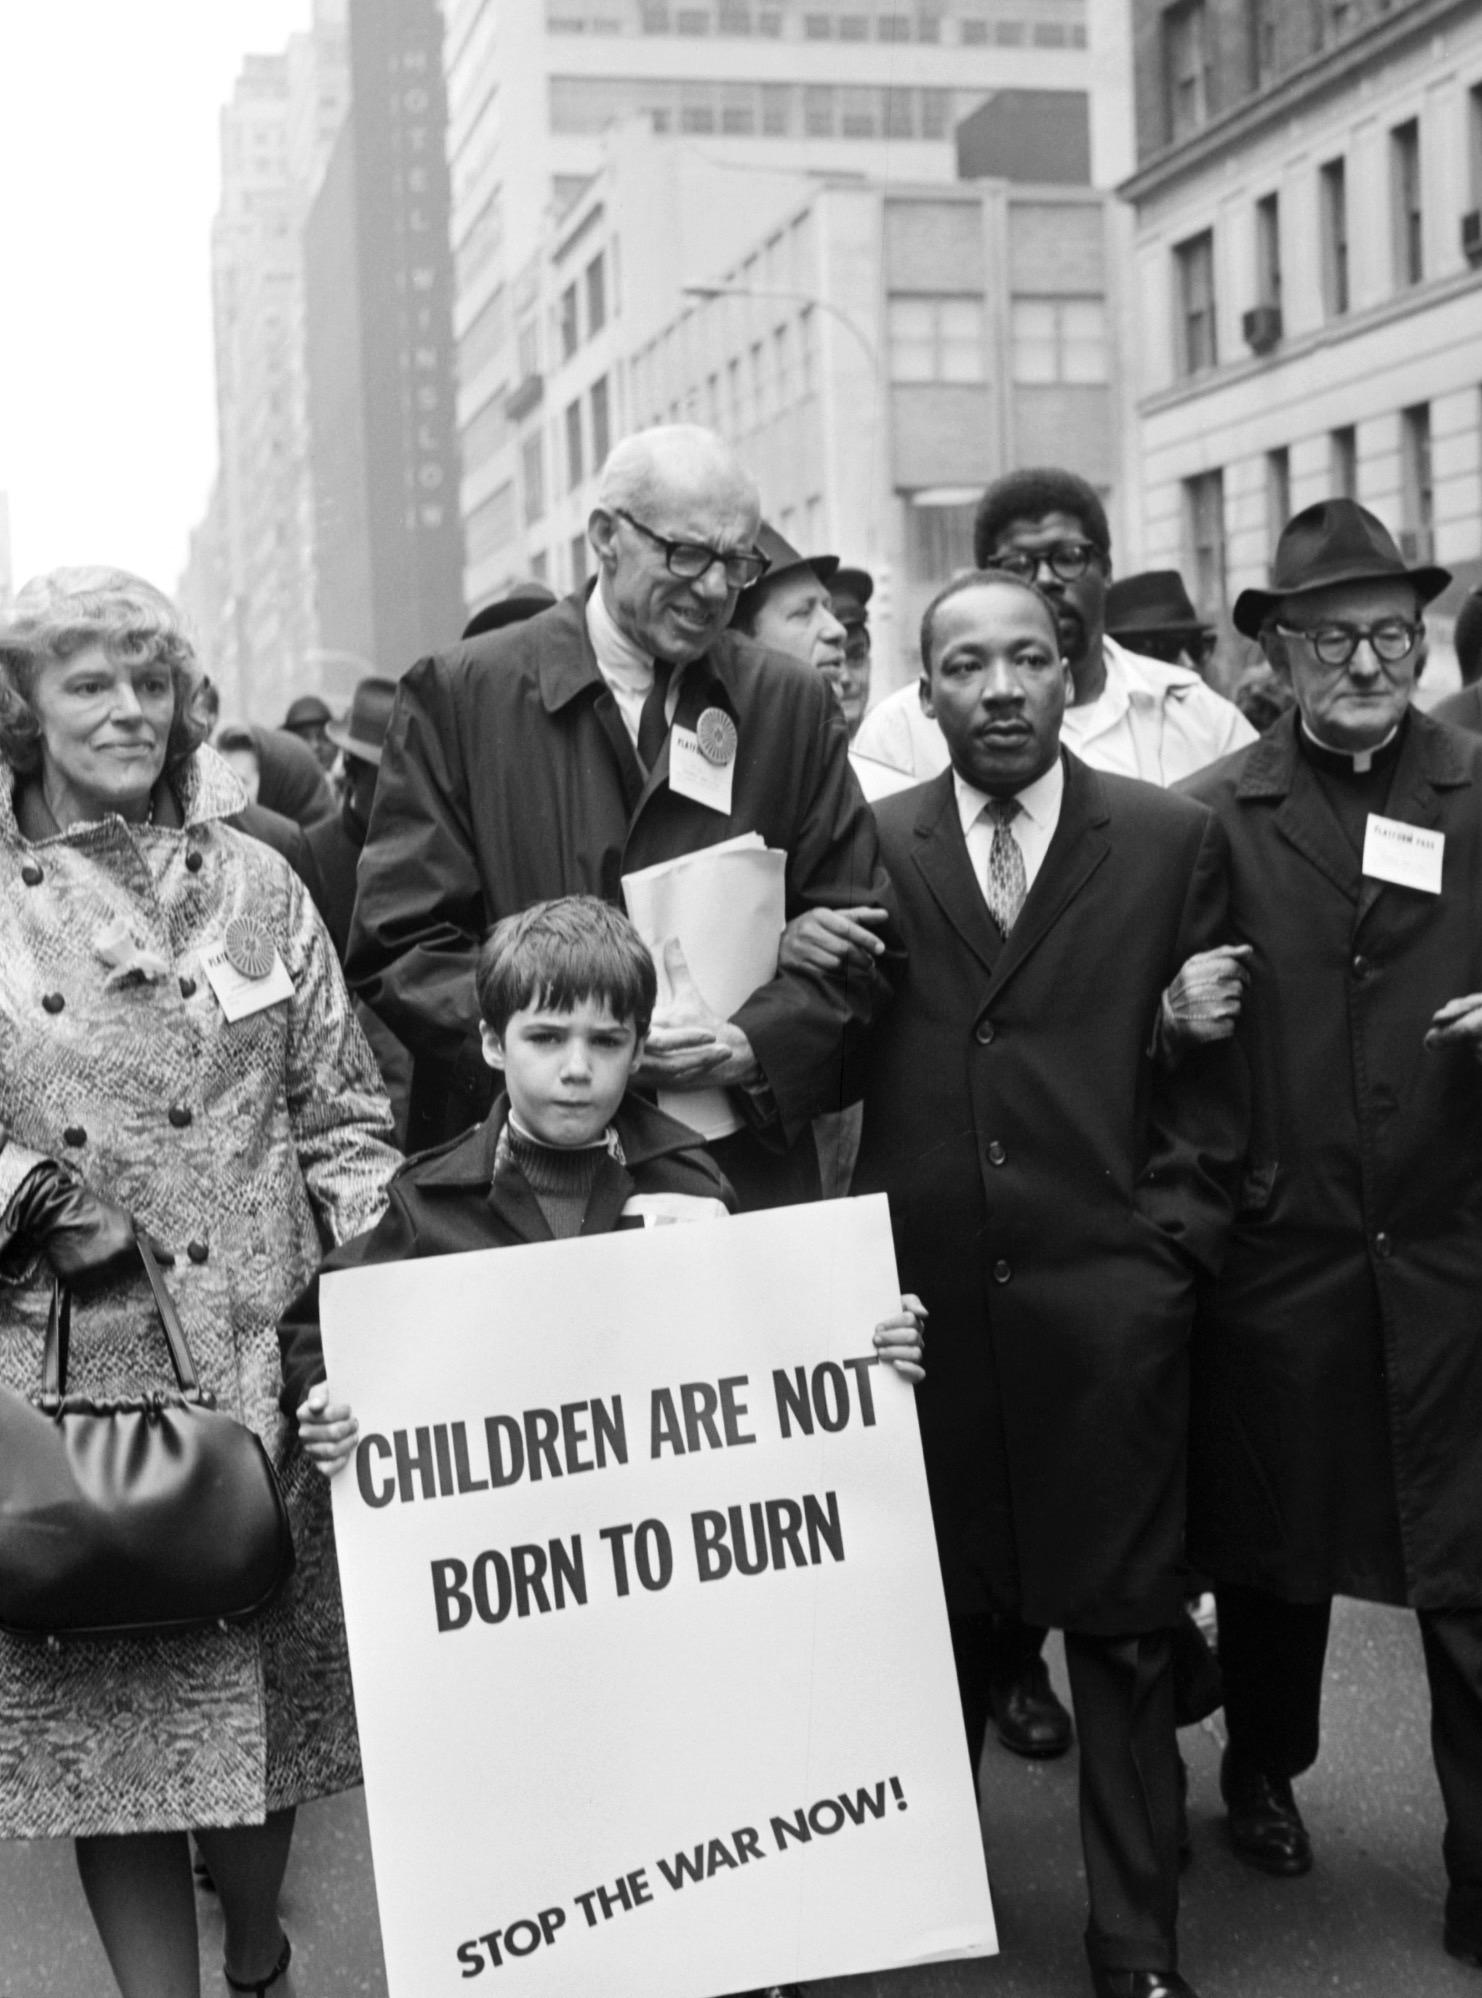 1967 New York City protest against Vietnam War led by Dr. Benjamin Spock and Martin Luther King, Jr.